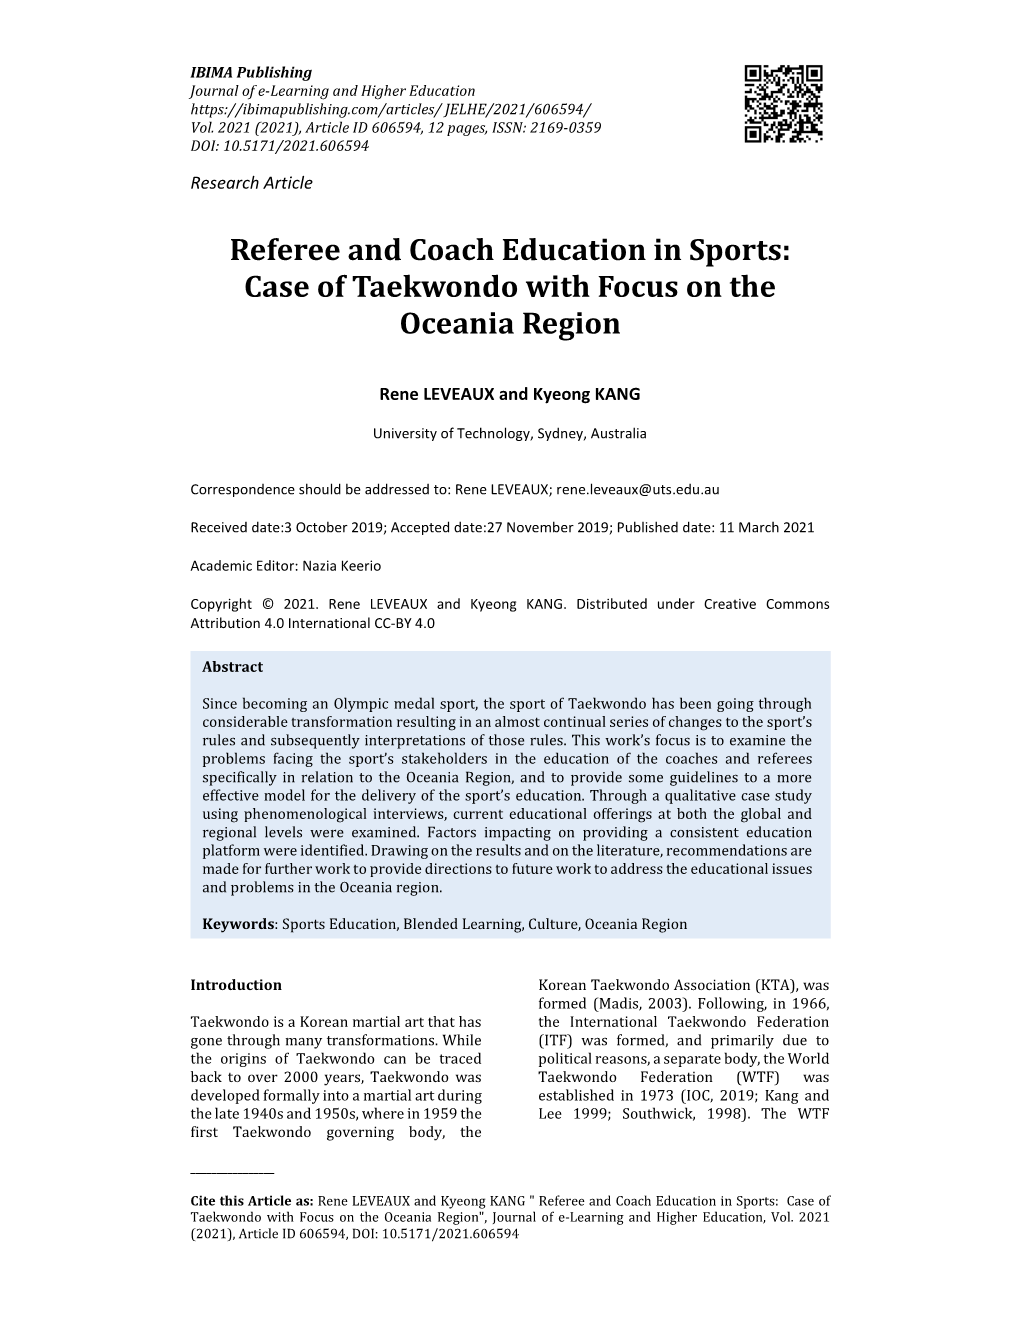 Referee and Coach Education in Sports: Case of Taekwondo with Focus on the Oceania Region